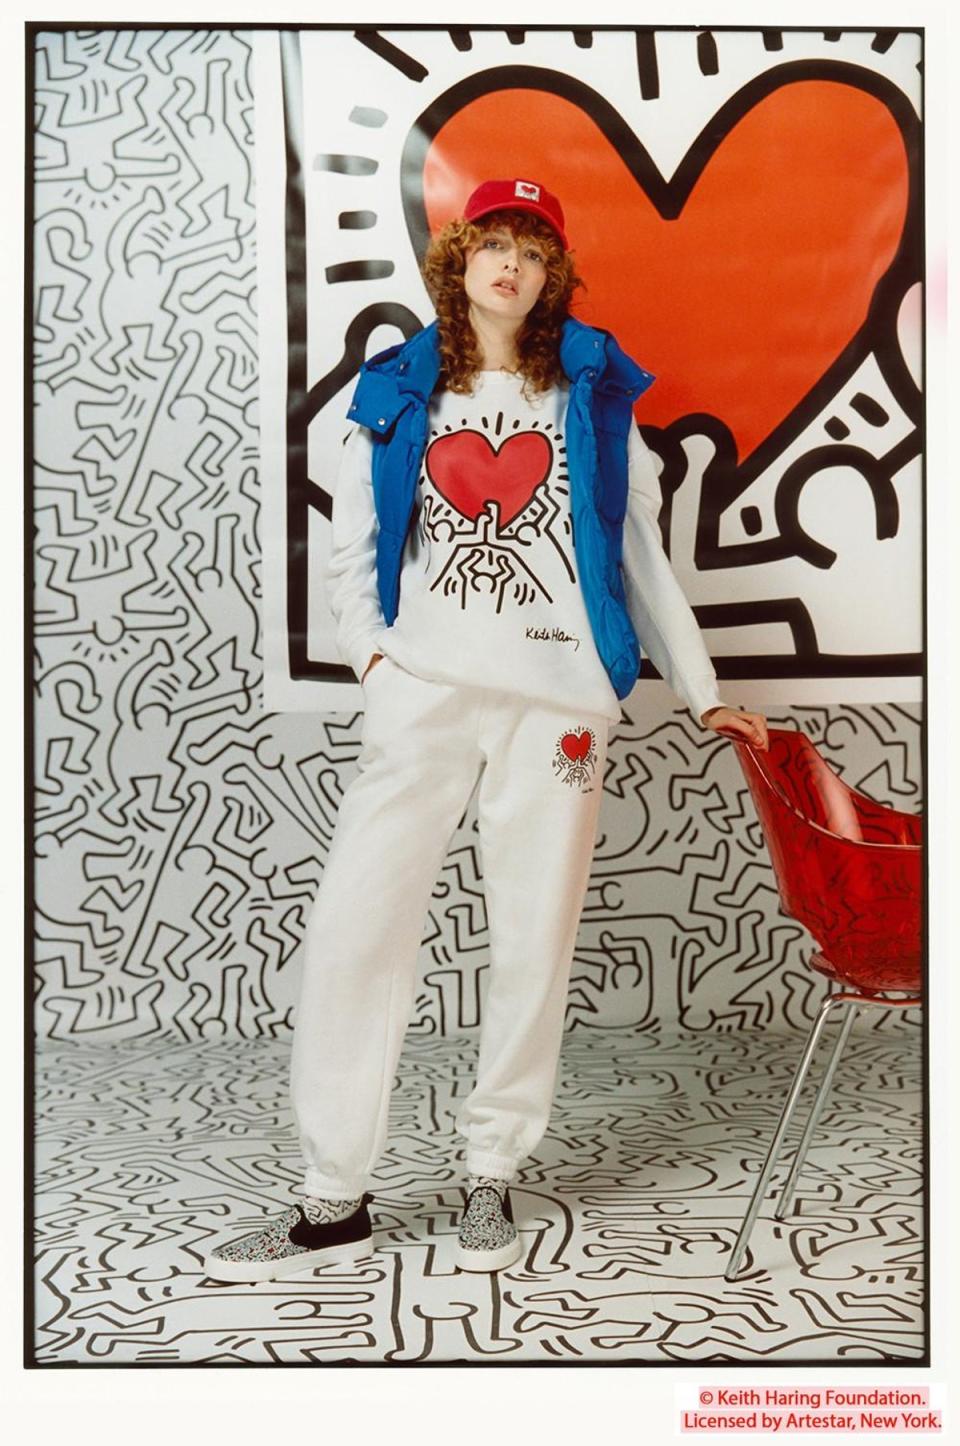 Primark has launched a Keith Haring collection (Primark/Keith Haring Foundation licensed by Artestar)